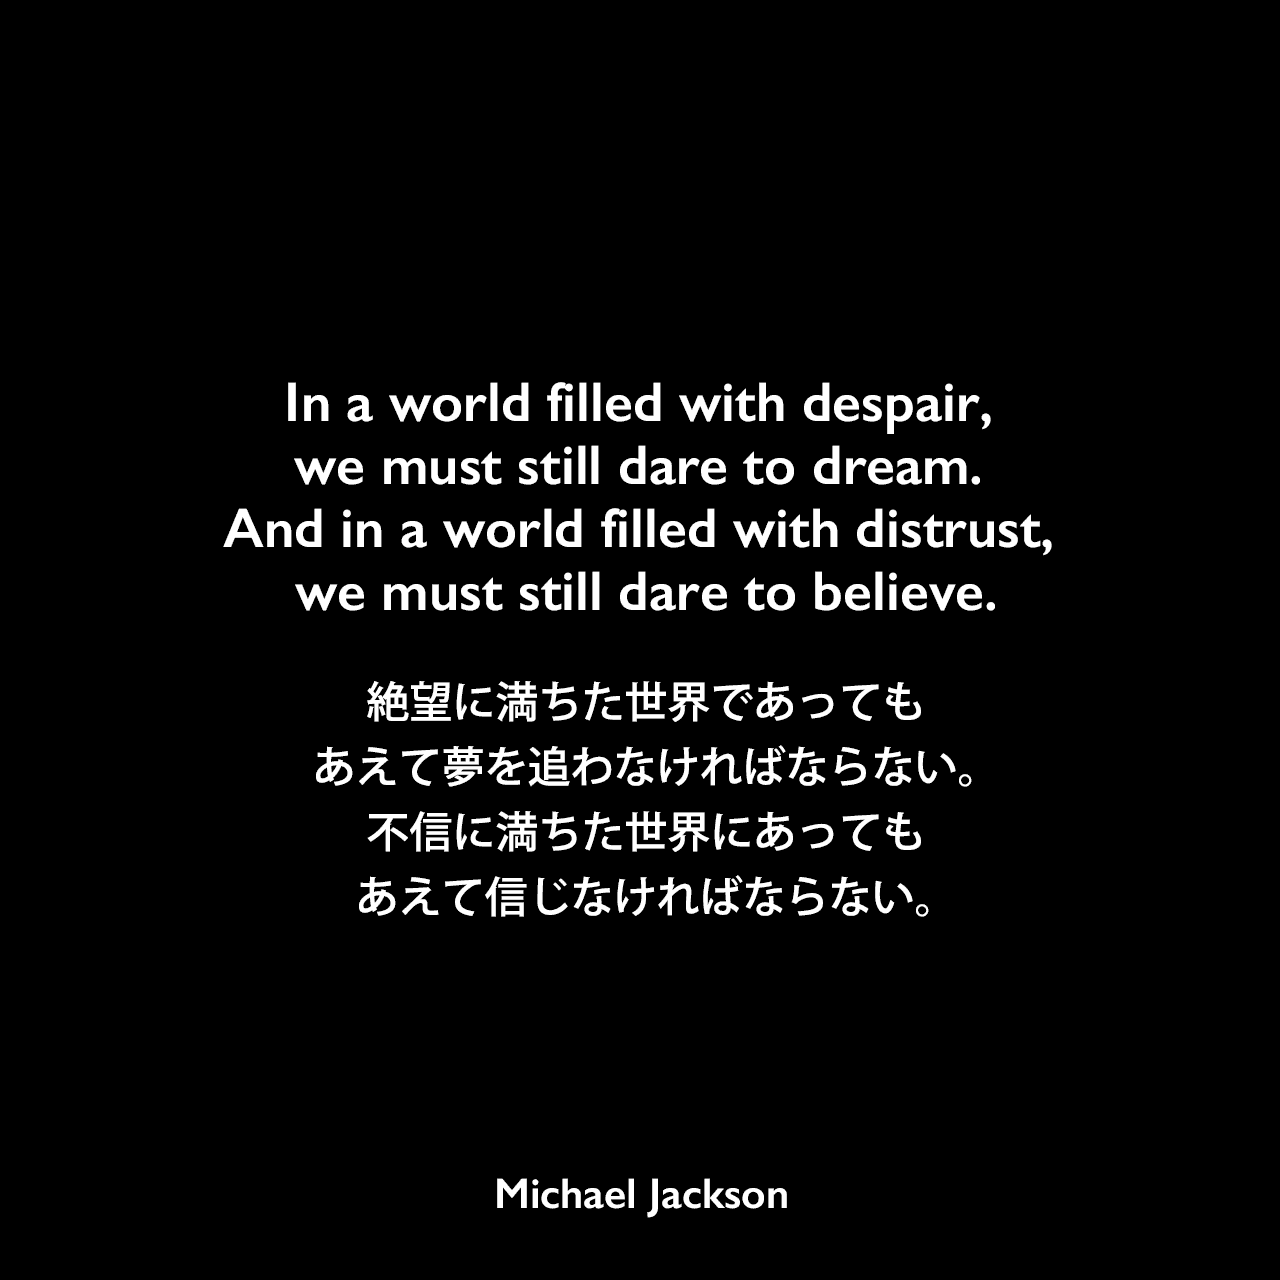 In a world filled with despair, we must still dare to dream. And in a world filled with distrust, we must still dare to believe.絶望に満ちた世界であっても、あえて夢を追わなければならない。不信に満ちた世界にあっても、あえて信じなければならない。Michael Jackson